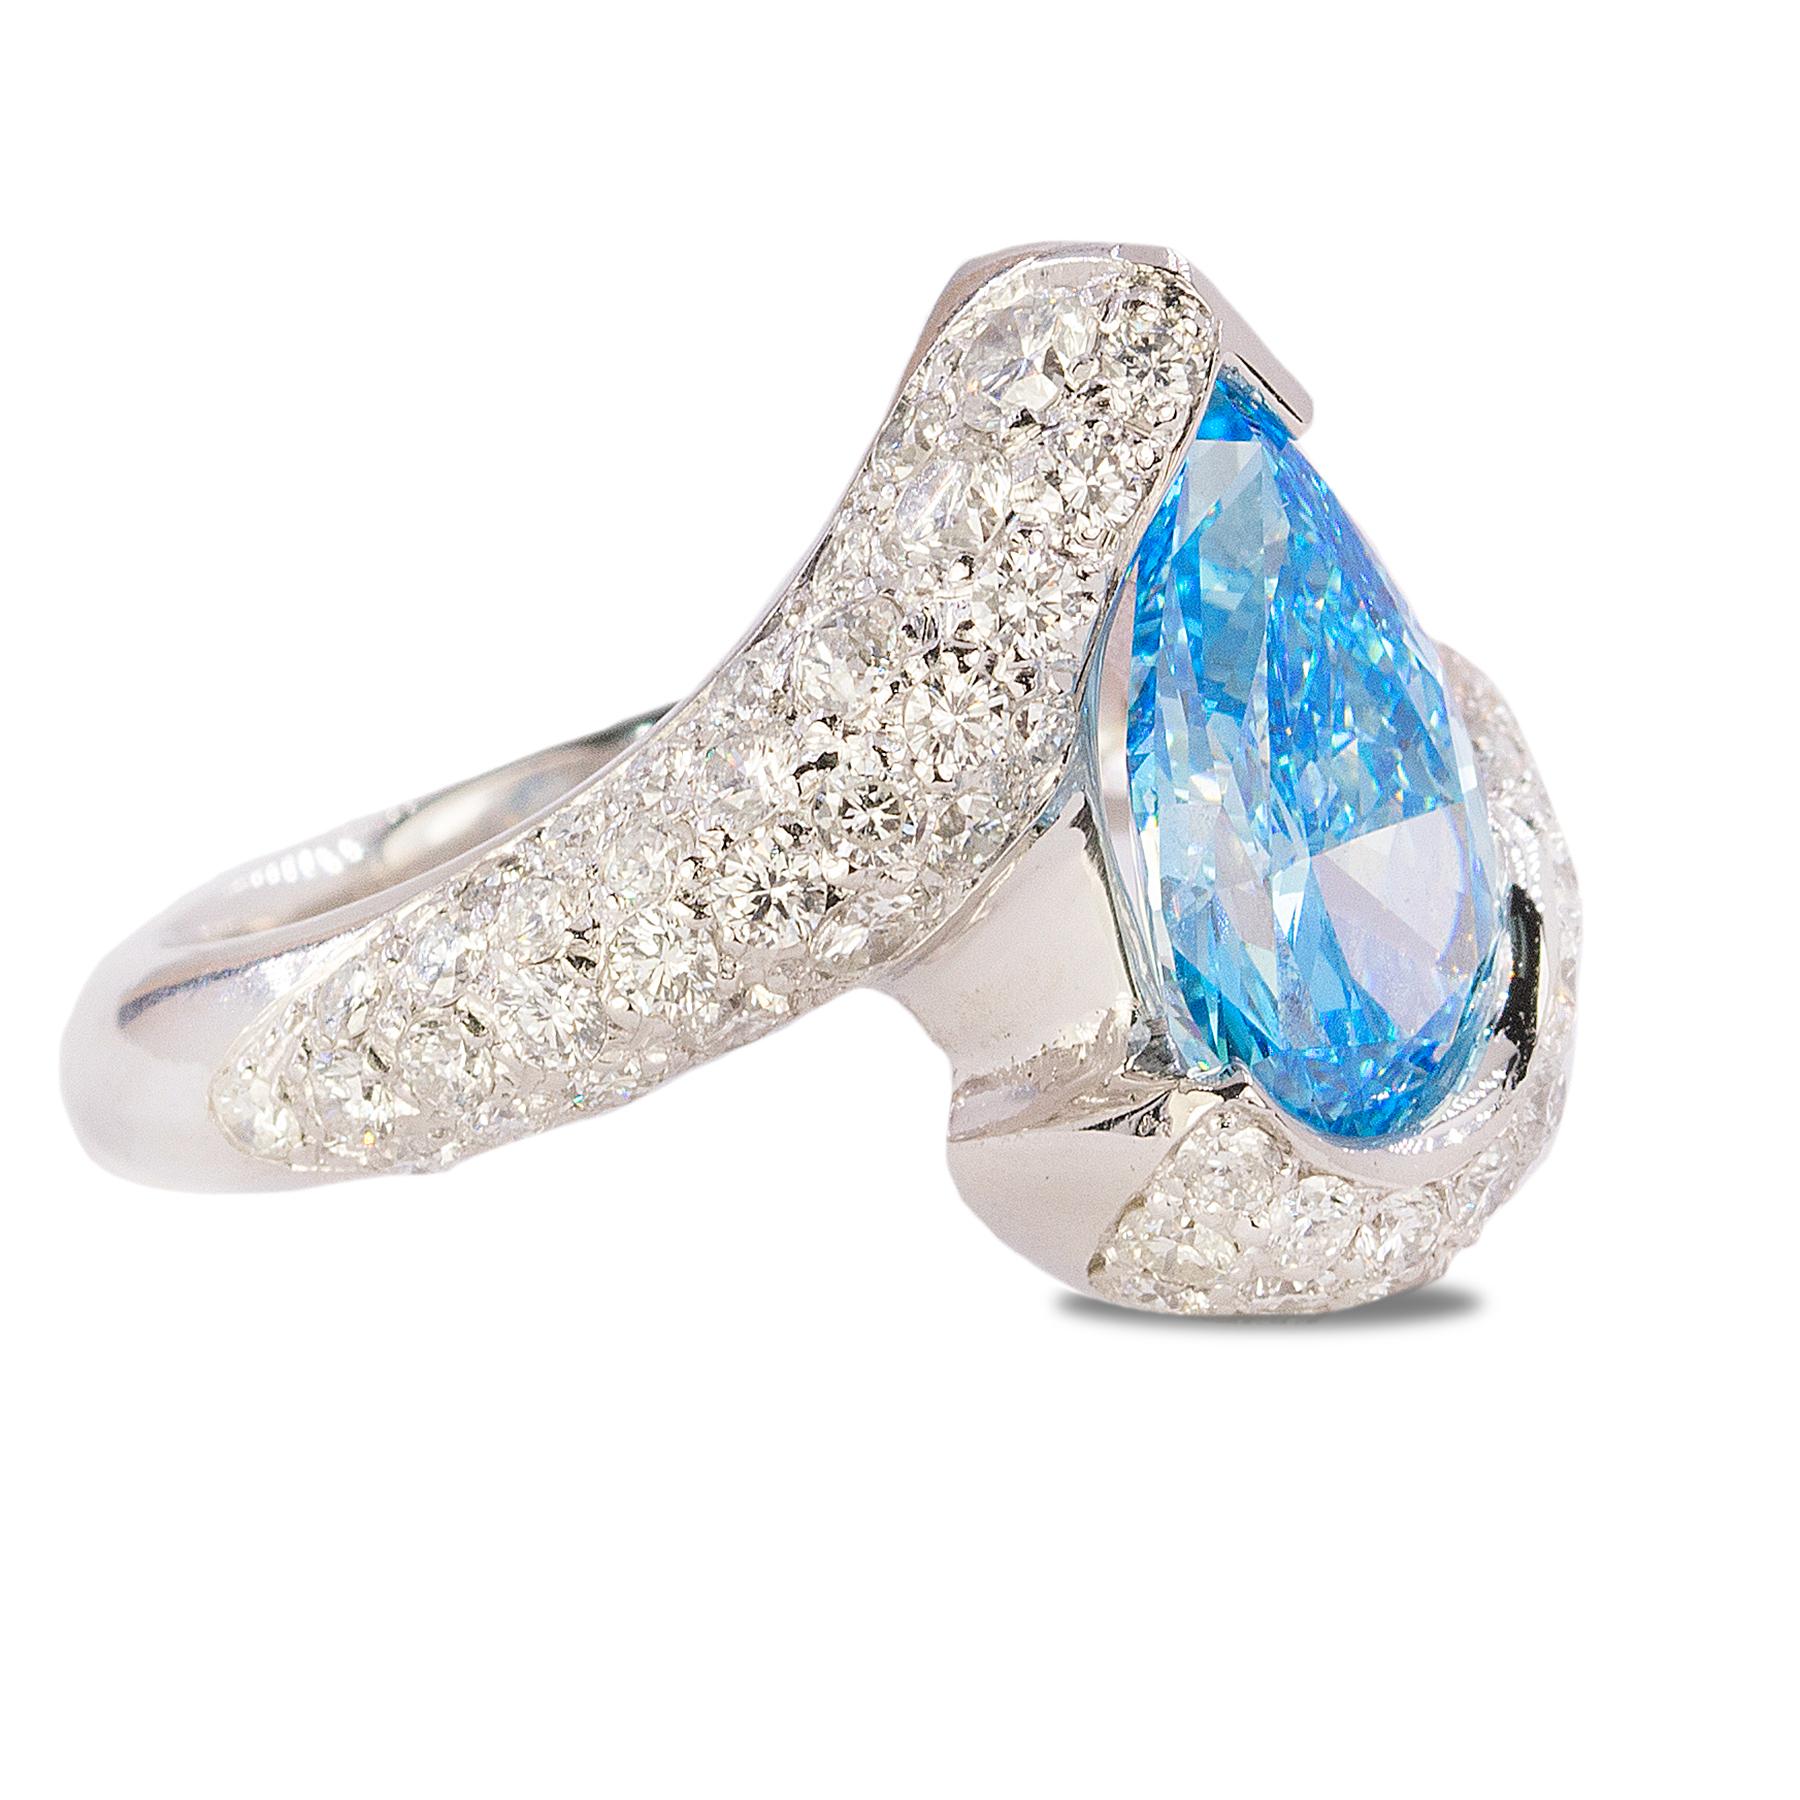 Platiunm Ring with GIA certified HPHT Fancy Vivid Blue, VVS2 Pear Shape DIamond and 2.71 carats of pave set modern round brilliant diamonds. 